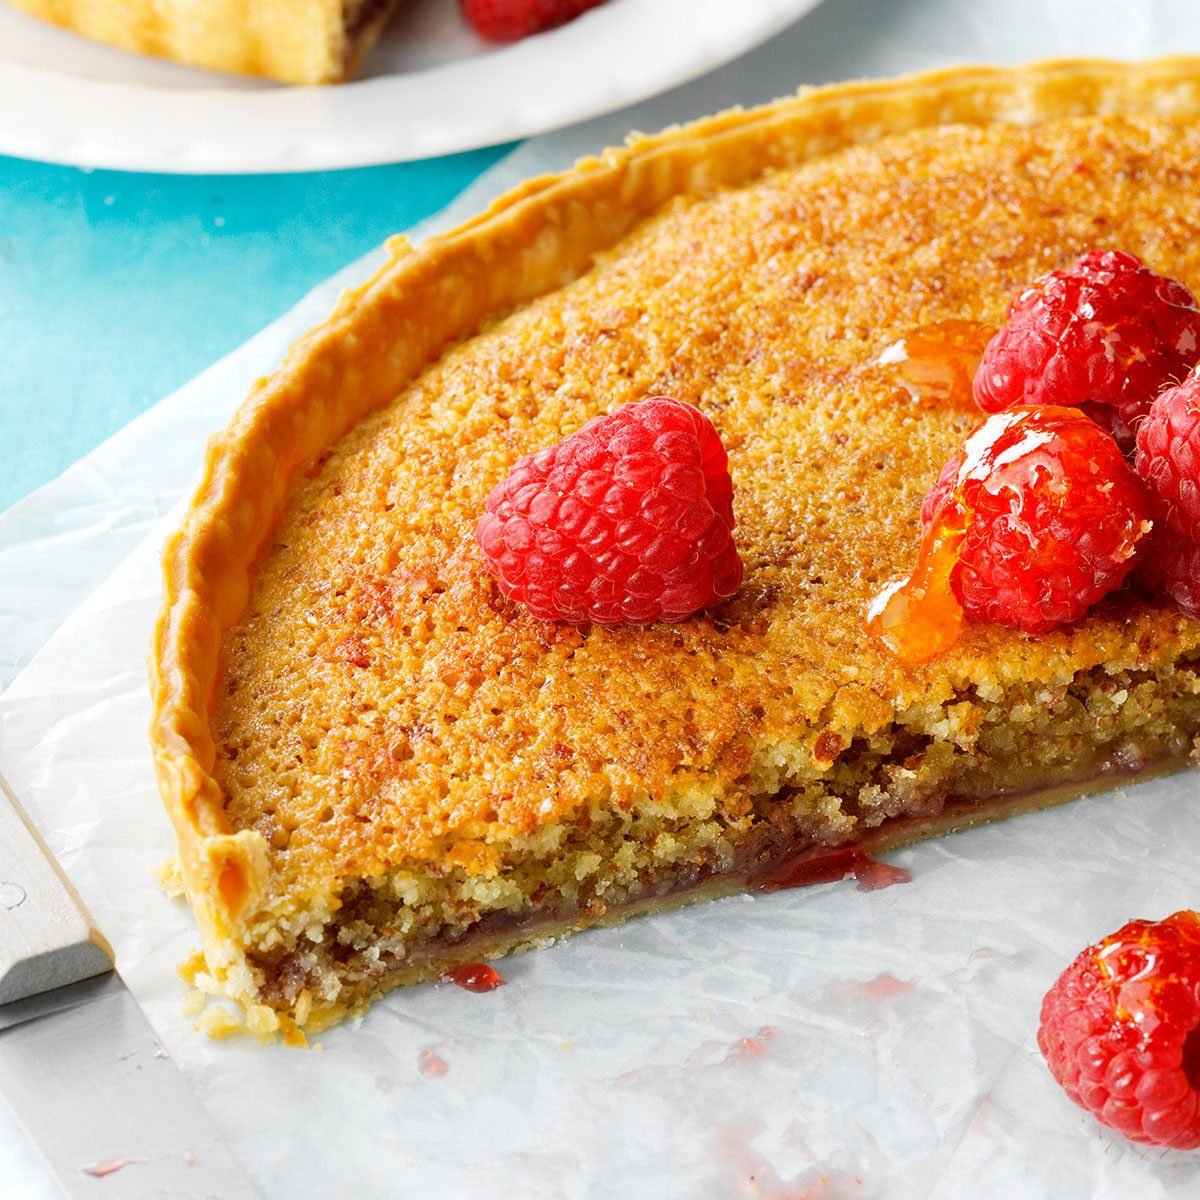 Traditional Bakewell Tart with Rasberries as Toppings